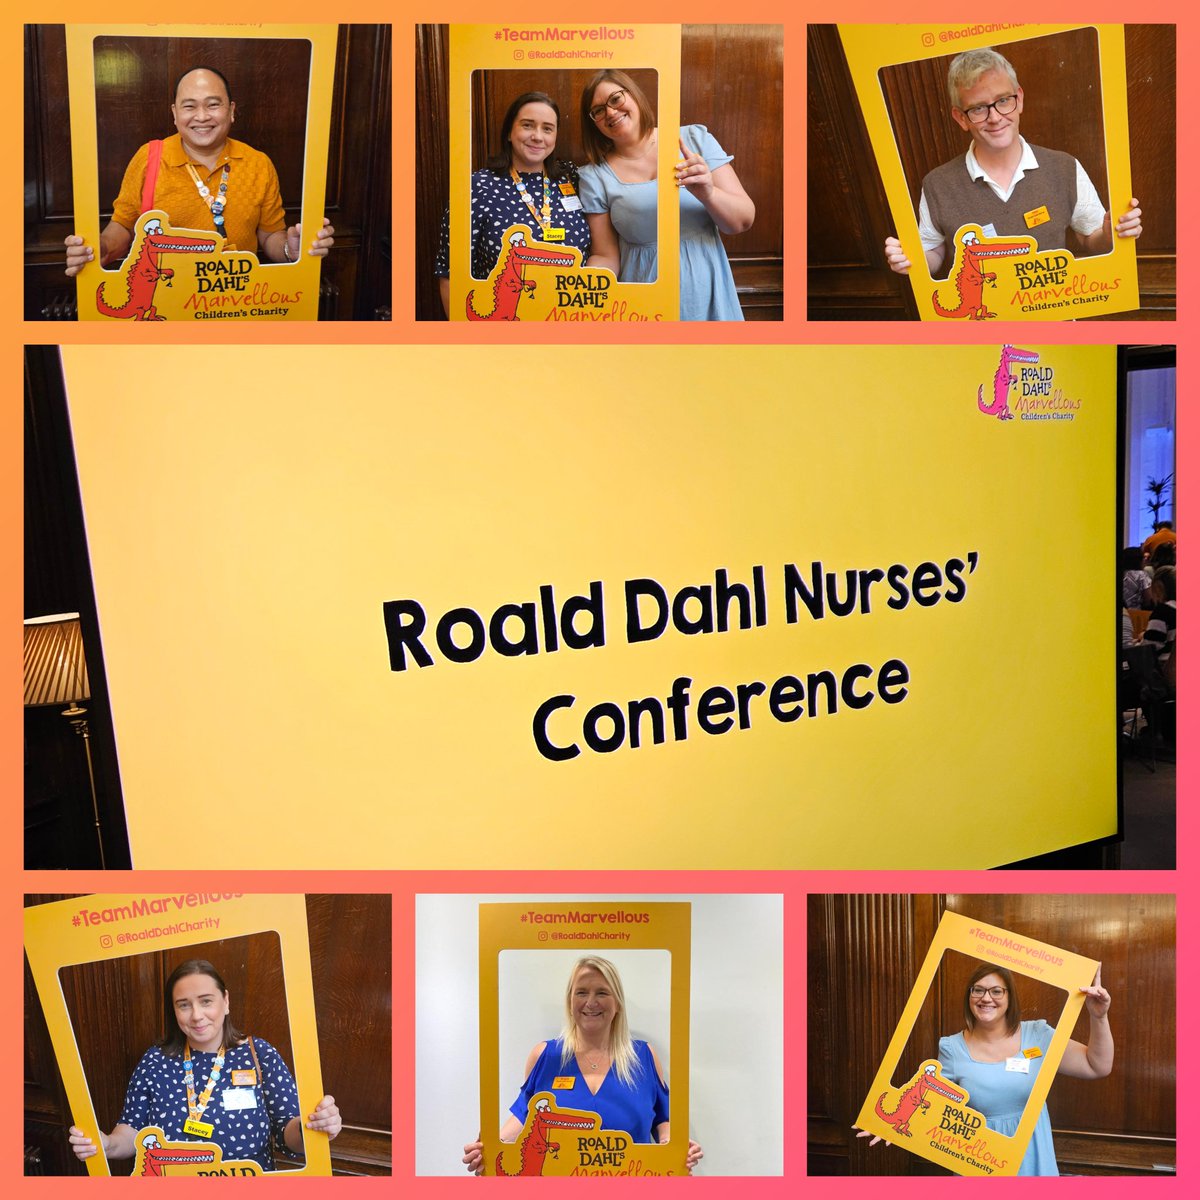 #RoaldDahlNursingConference

A #marvellous few days with @RoaldDahlFund 

Reigniting my passion for #Transition.

Great to catch up with so many of the #RoaldDahlNurses I have build relationships with over the last 3 years AND make so many new ones!